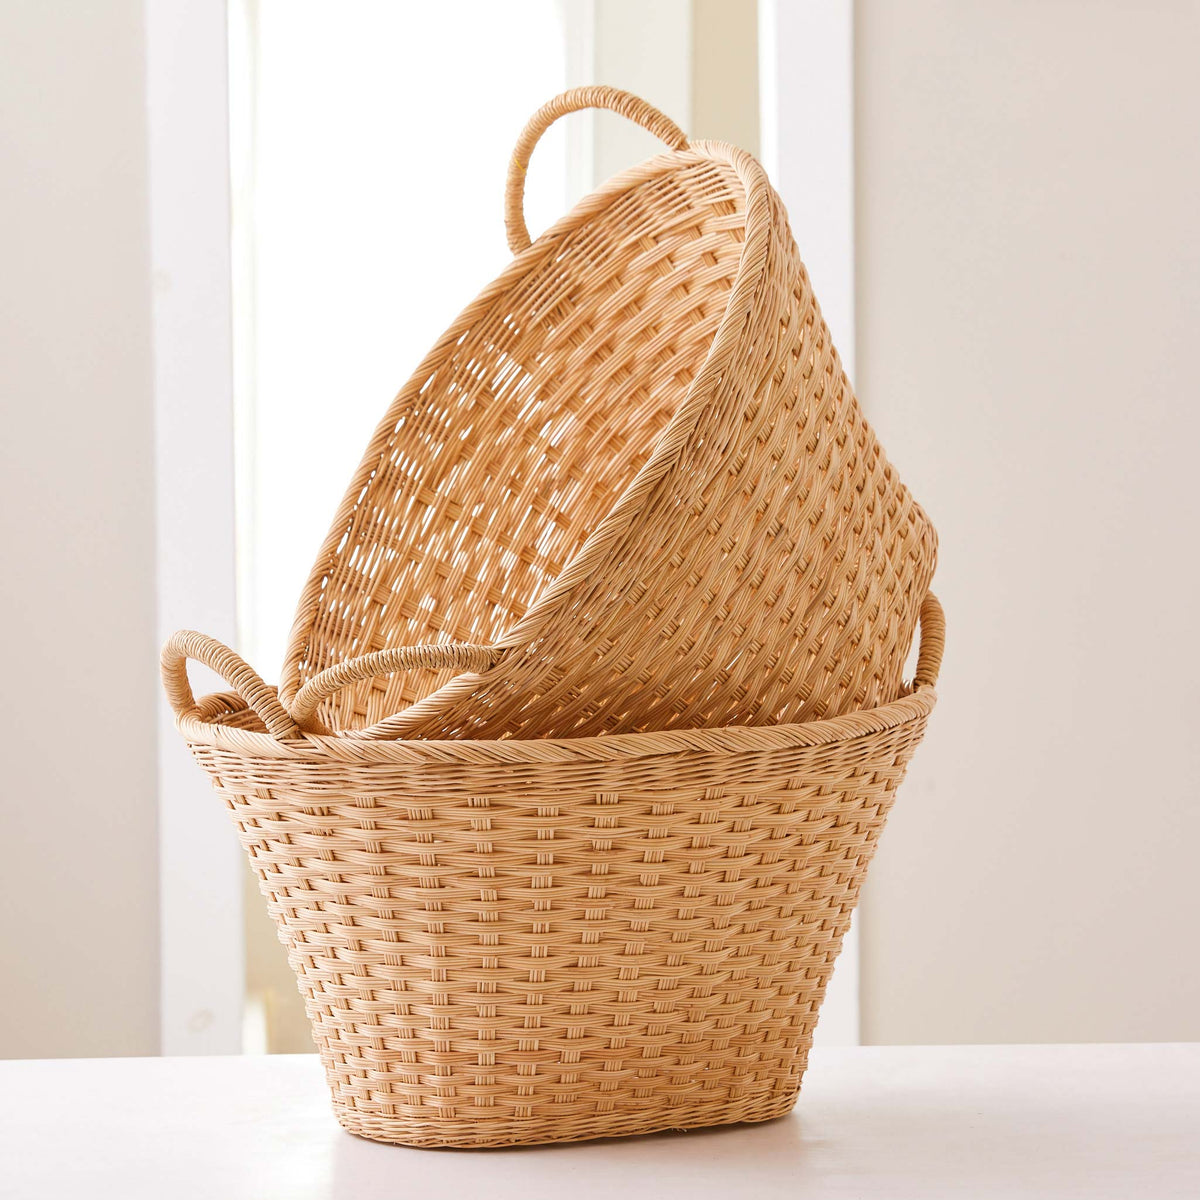 Beautiful Laundry basket. Traditional Laundry basket shape and handles. Tall, tough and durable laundry basket that is handmade and natural. 